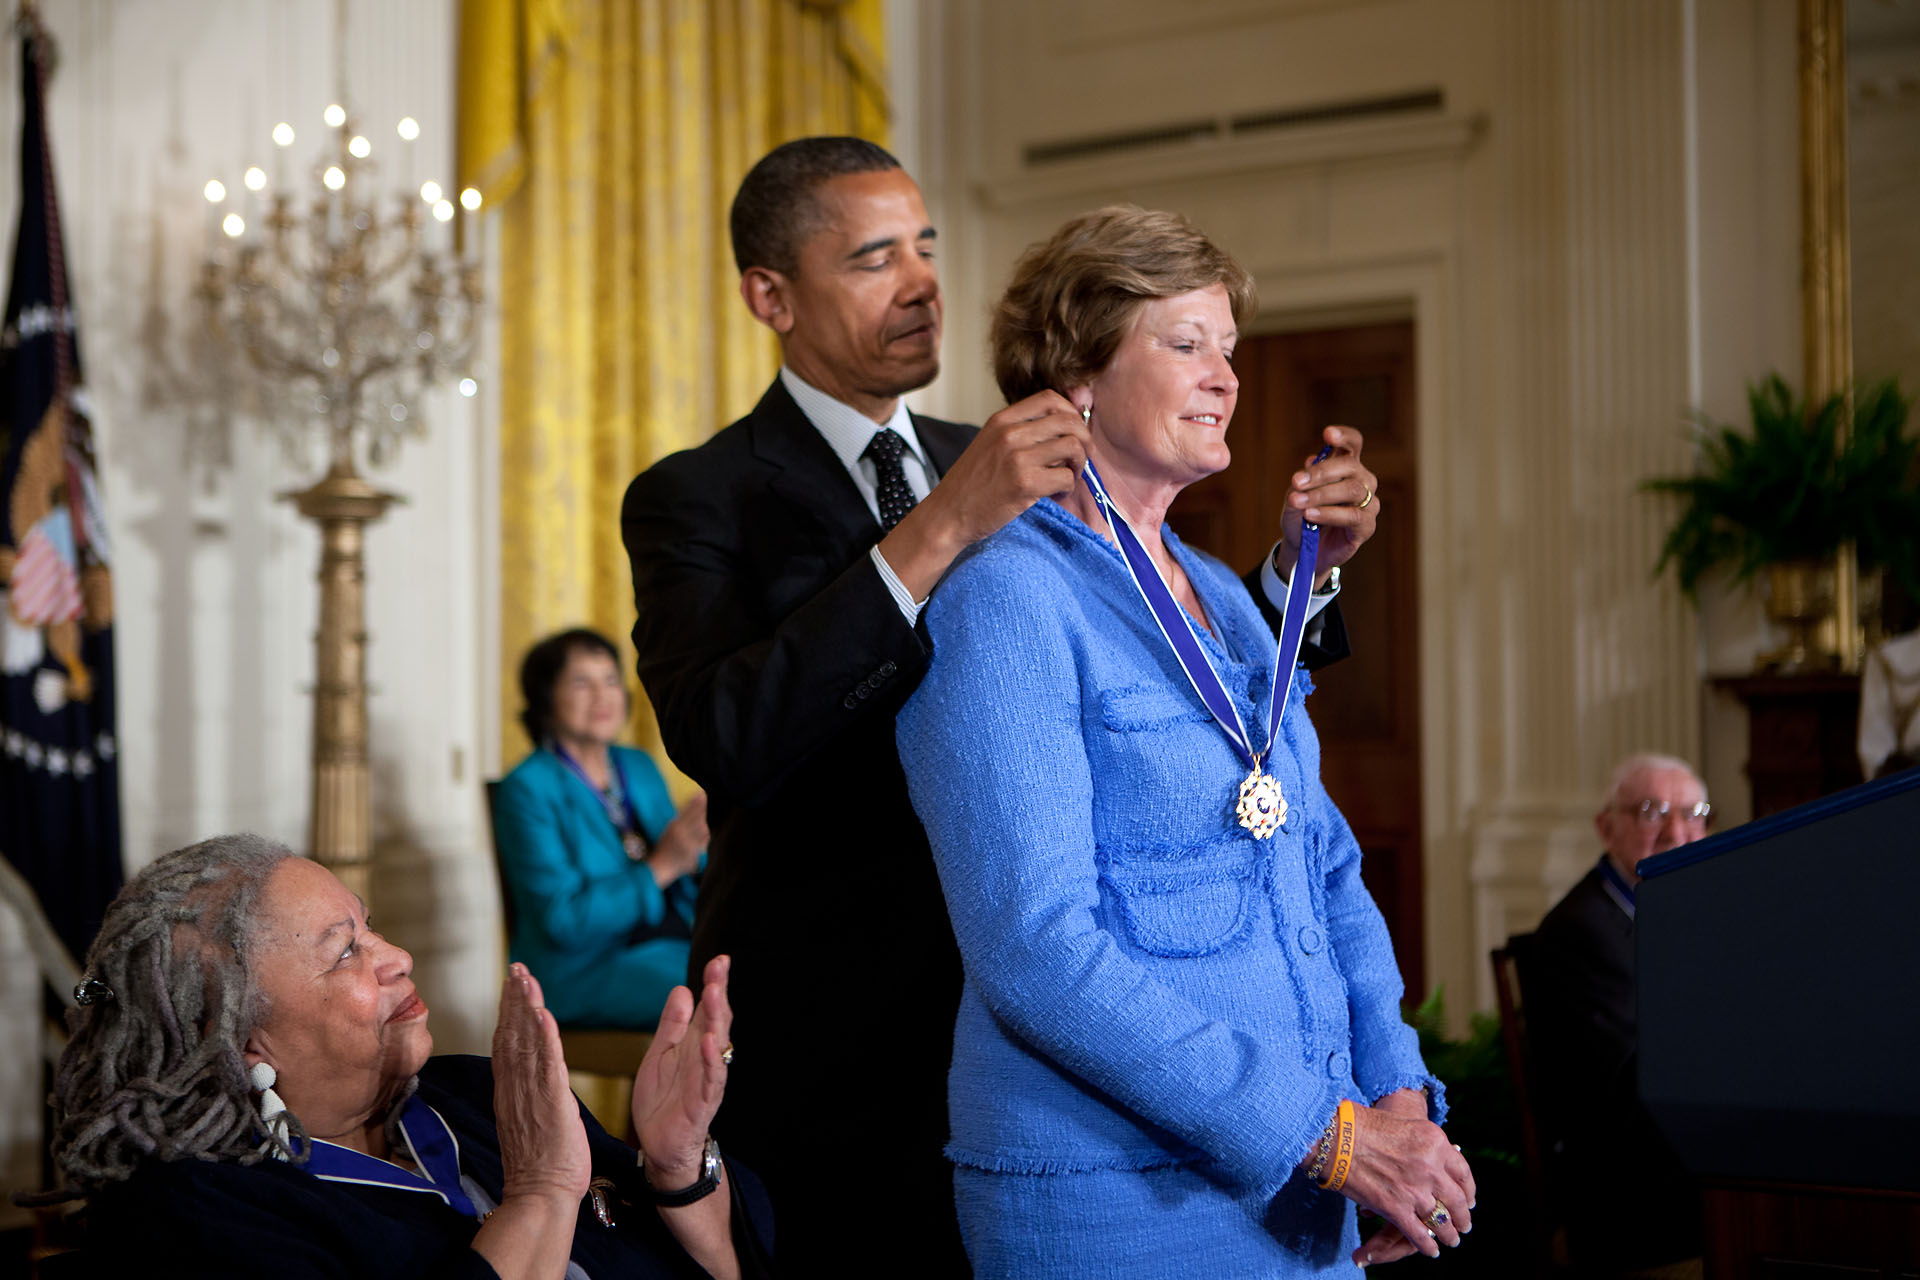 President Obama presents the Presidential Medal of Freedom to Pat Summitt (May 29, 2012)